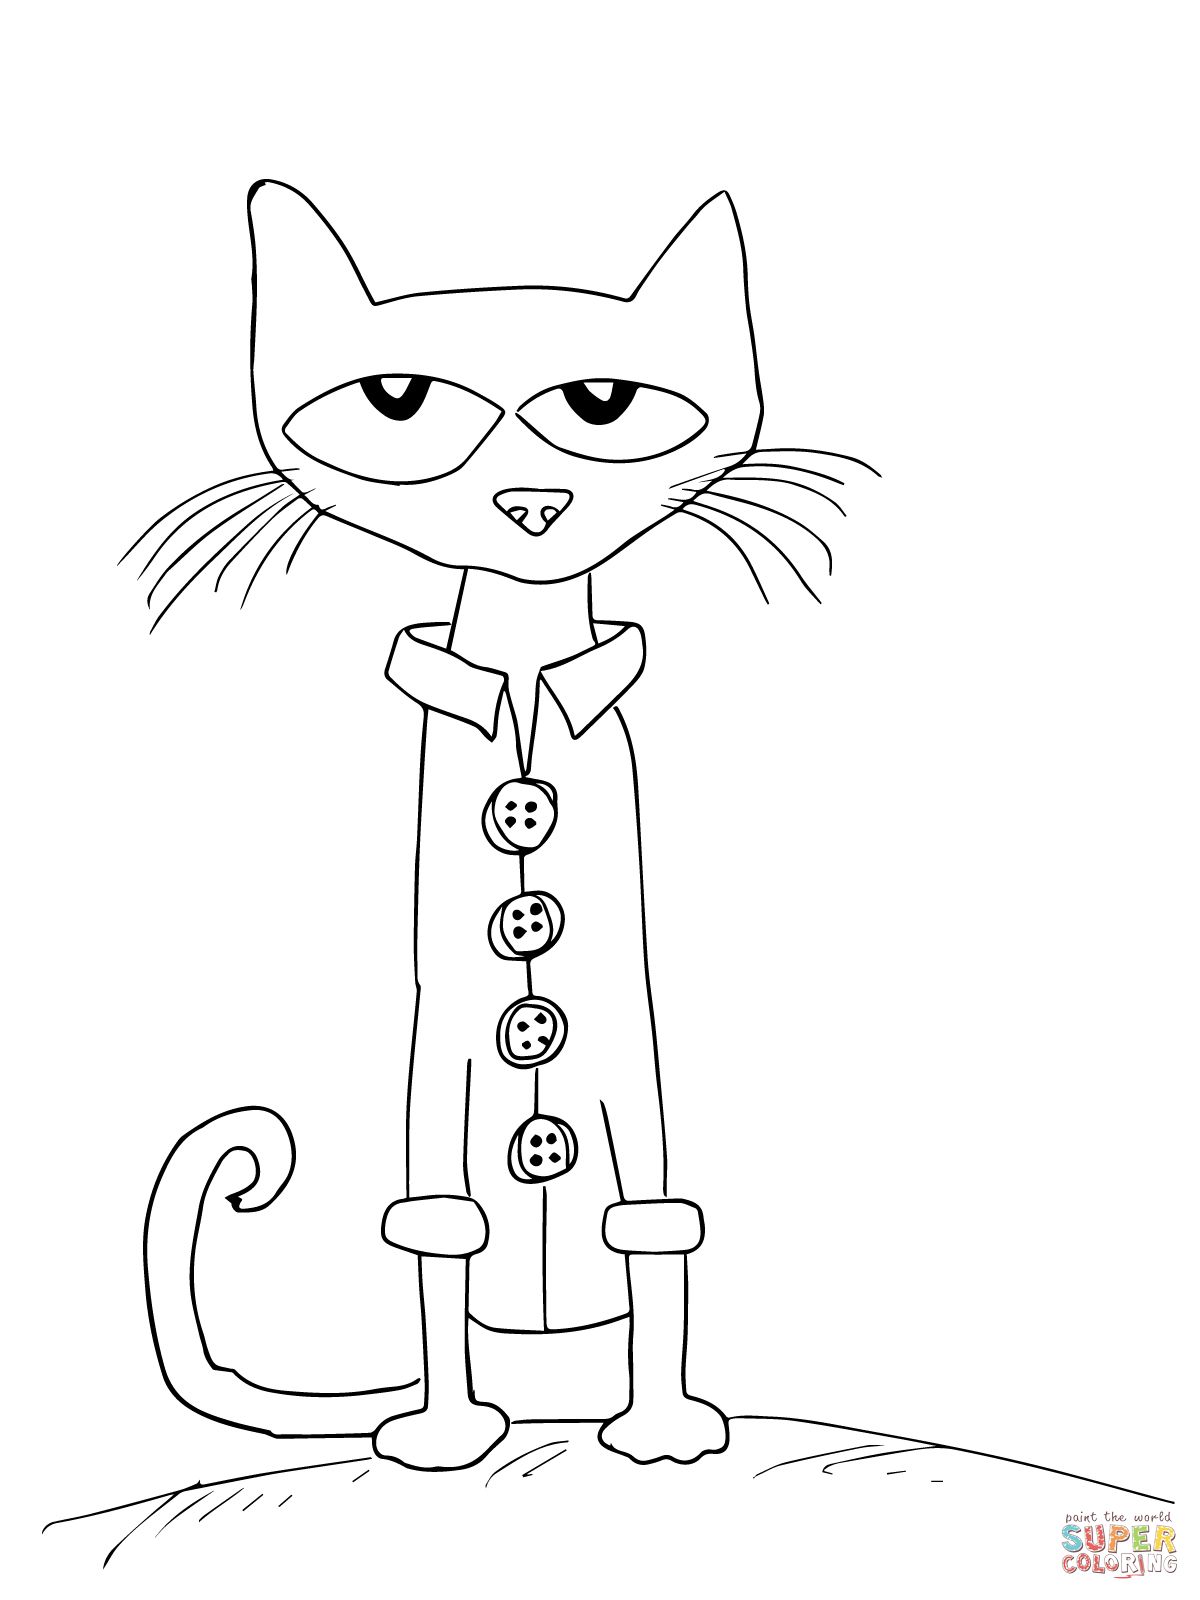 Pete the cat and his four groovy buttons coloring page supercoloring cat coloring page animal coloring pages pete the cat shoes